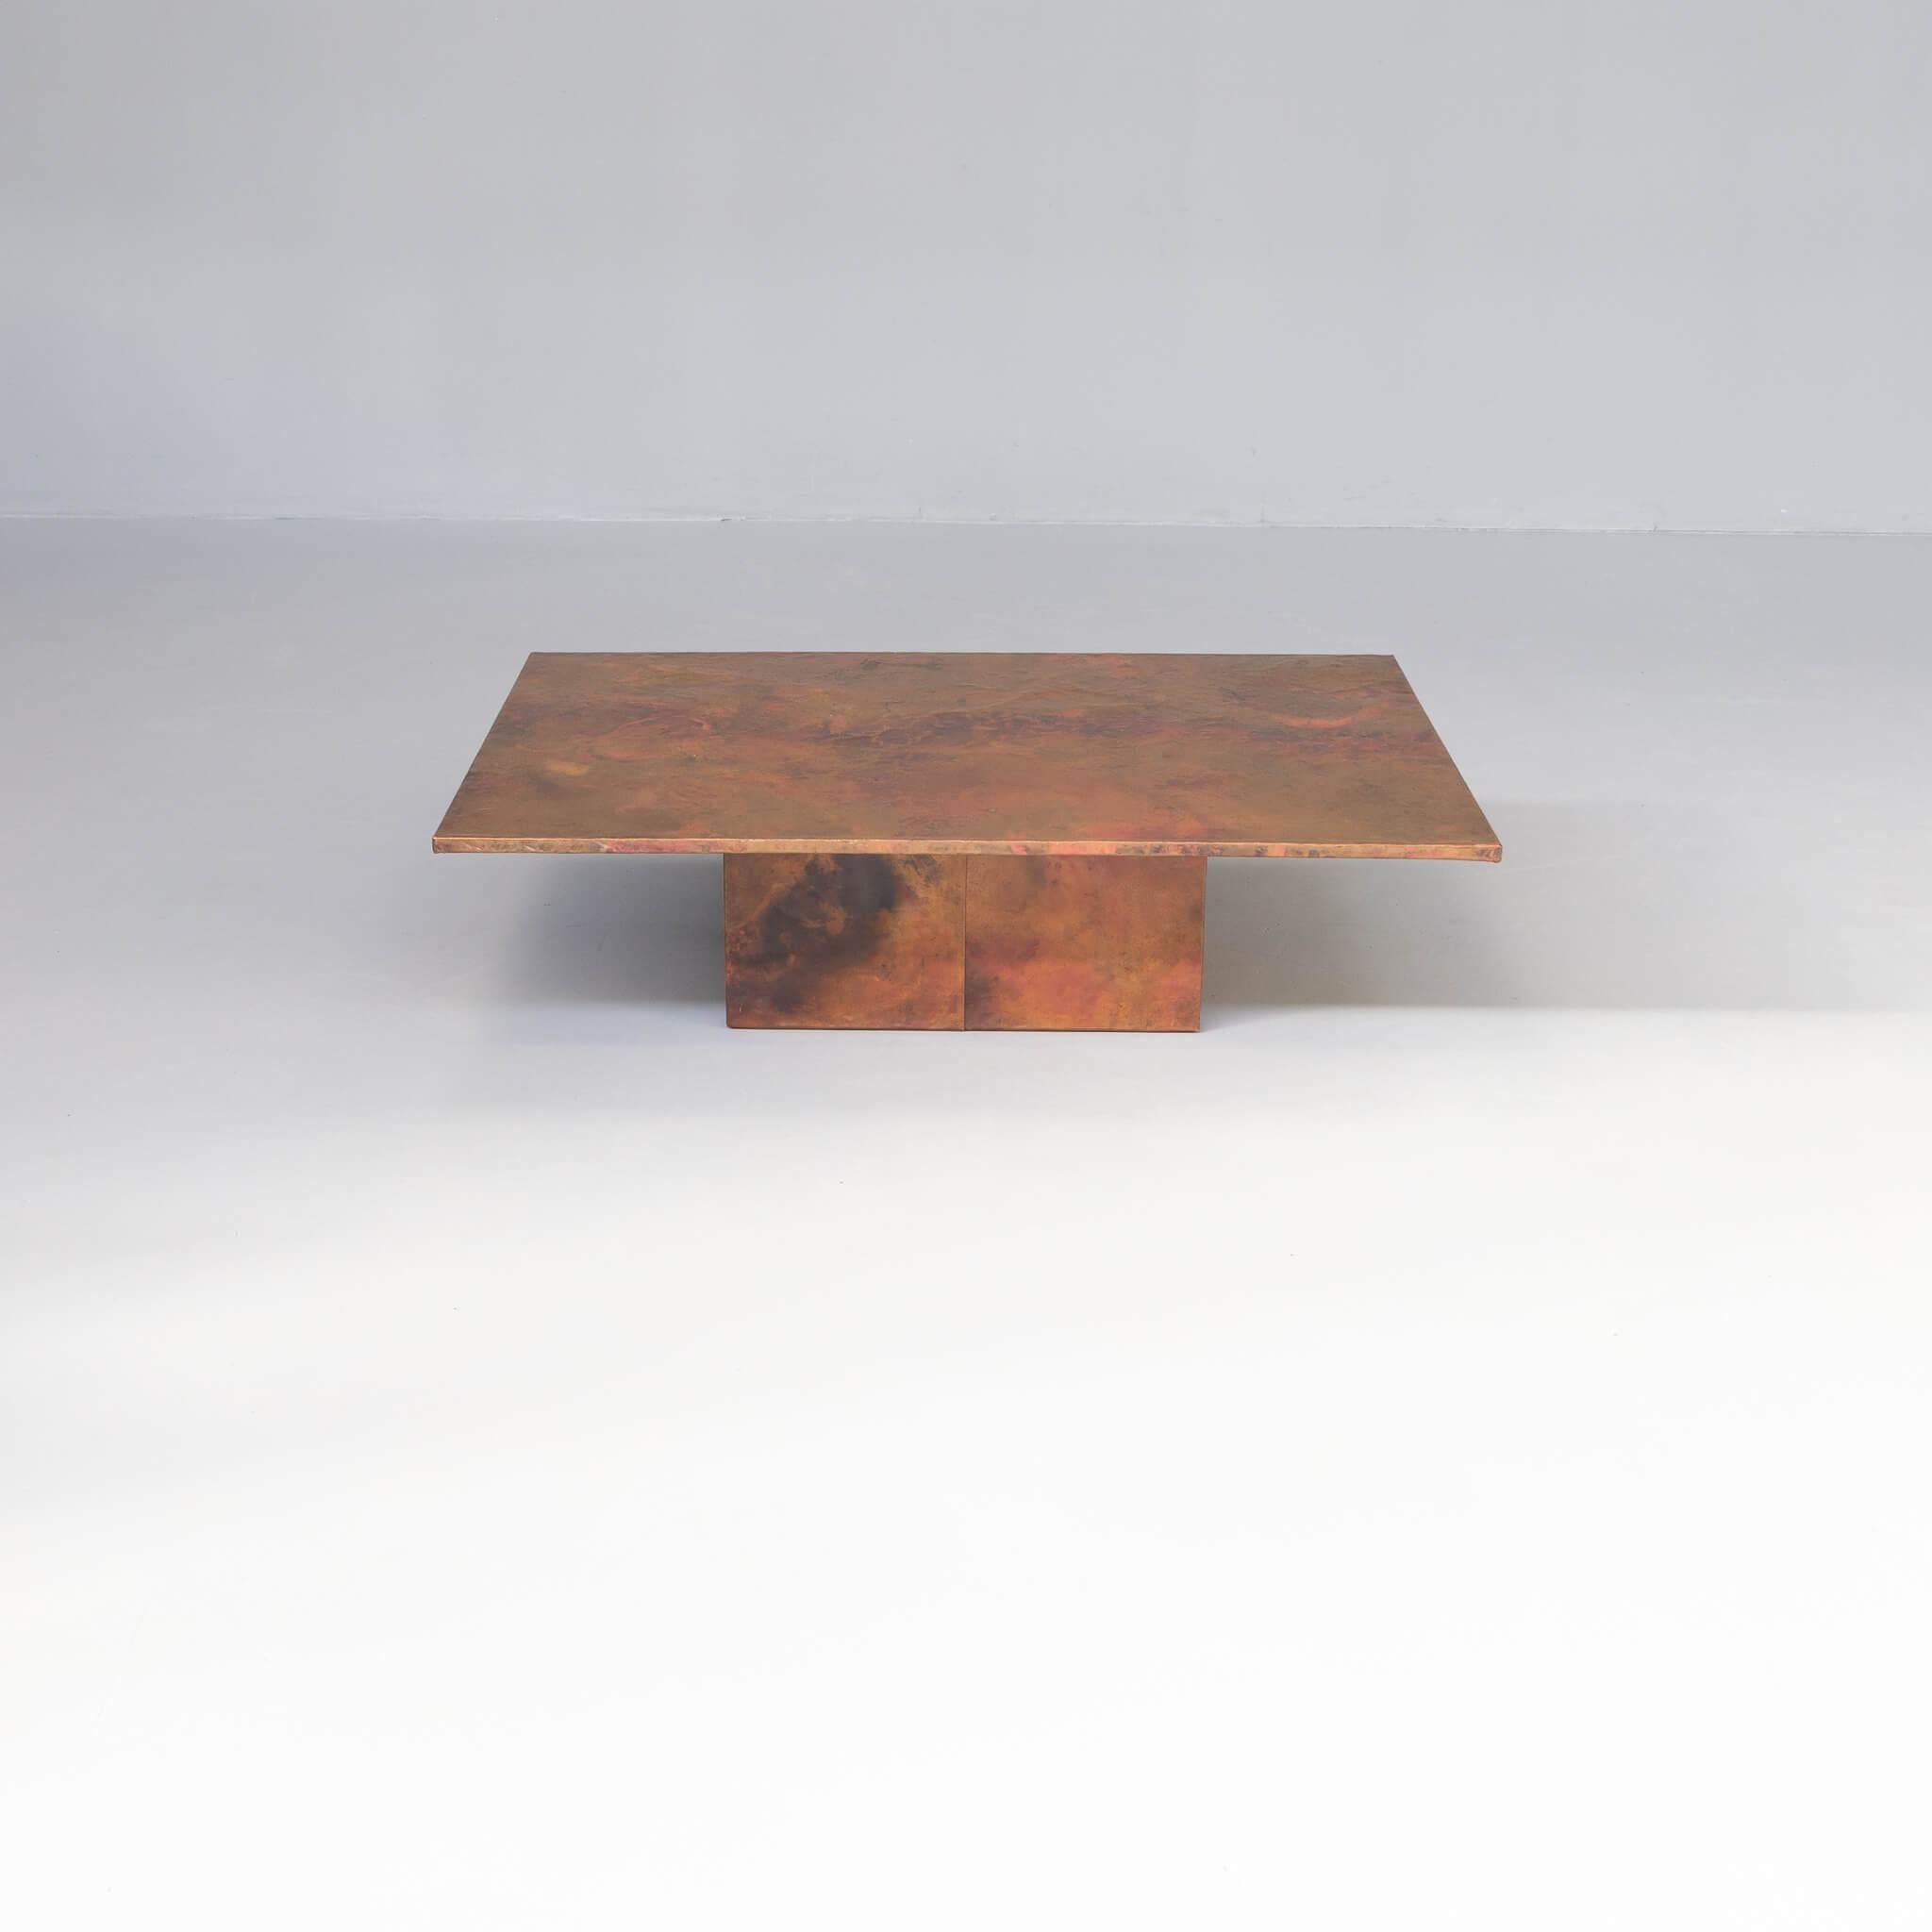 One copper etched beautiful coffee table. Unique and rare and handmade. Real piece of functional art from the 1970s. Table is stable and firm in good condition consistent with age and use.